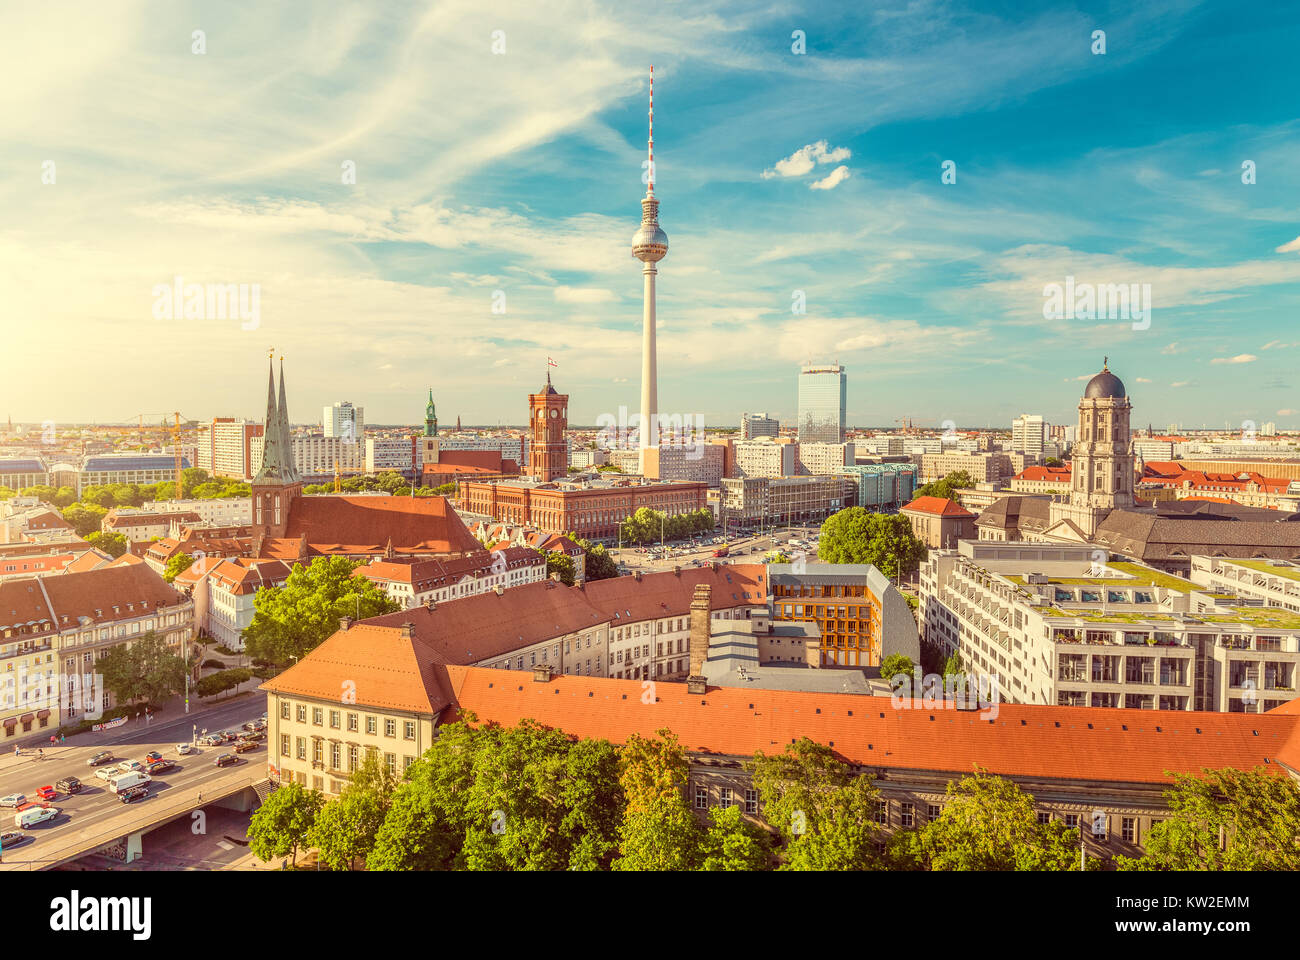 Aerial view of Berlin skyline with famous TV tower and Spree river on a beautiful day with blue sky and clouds with retro vintage filter effect Stock Photo